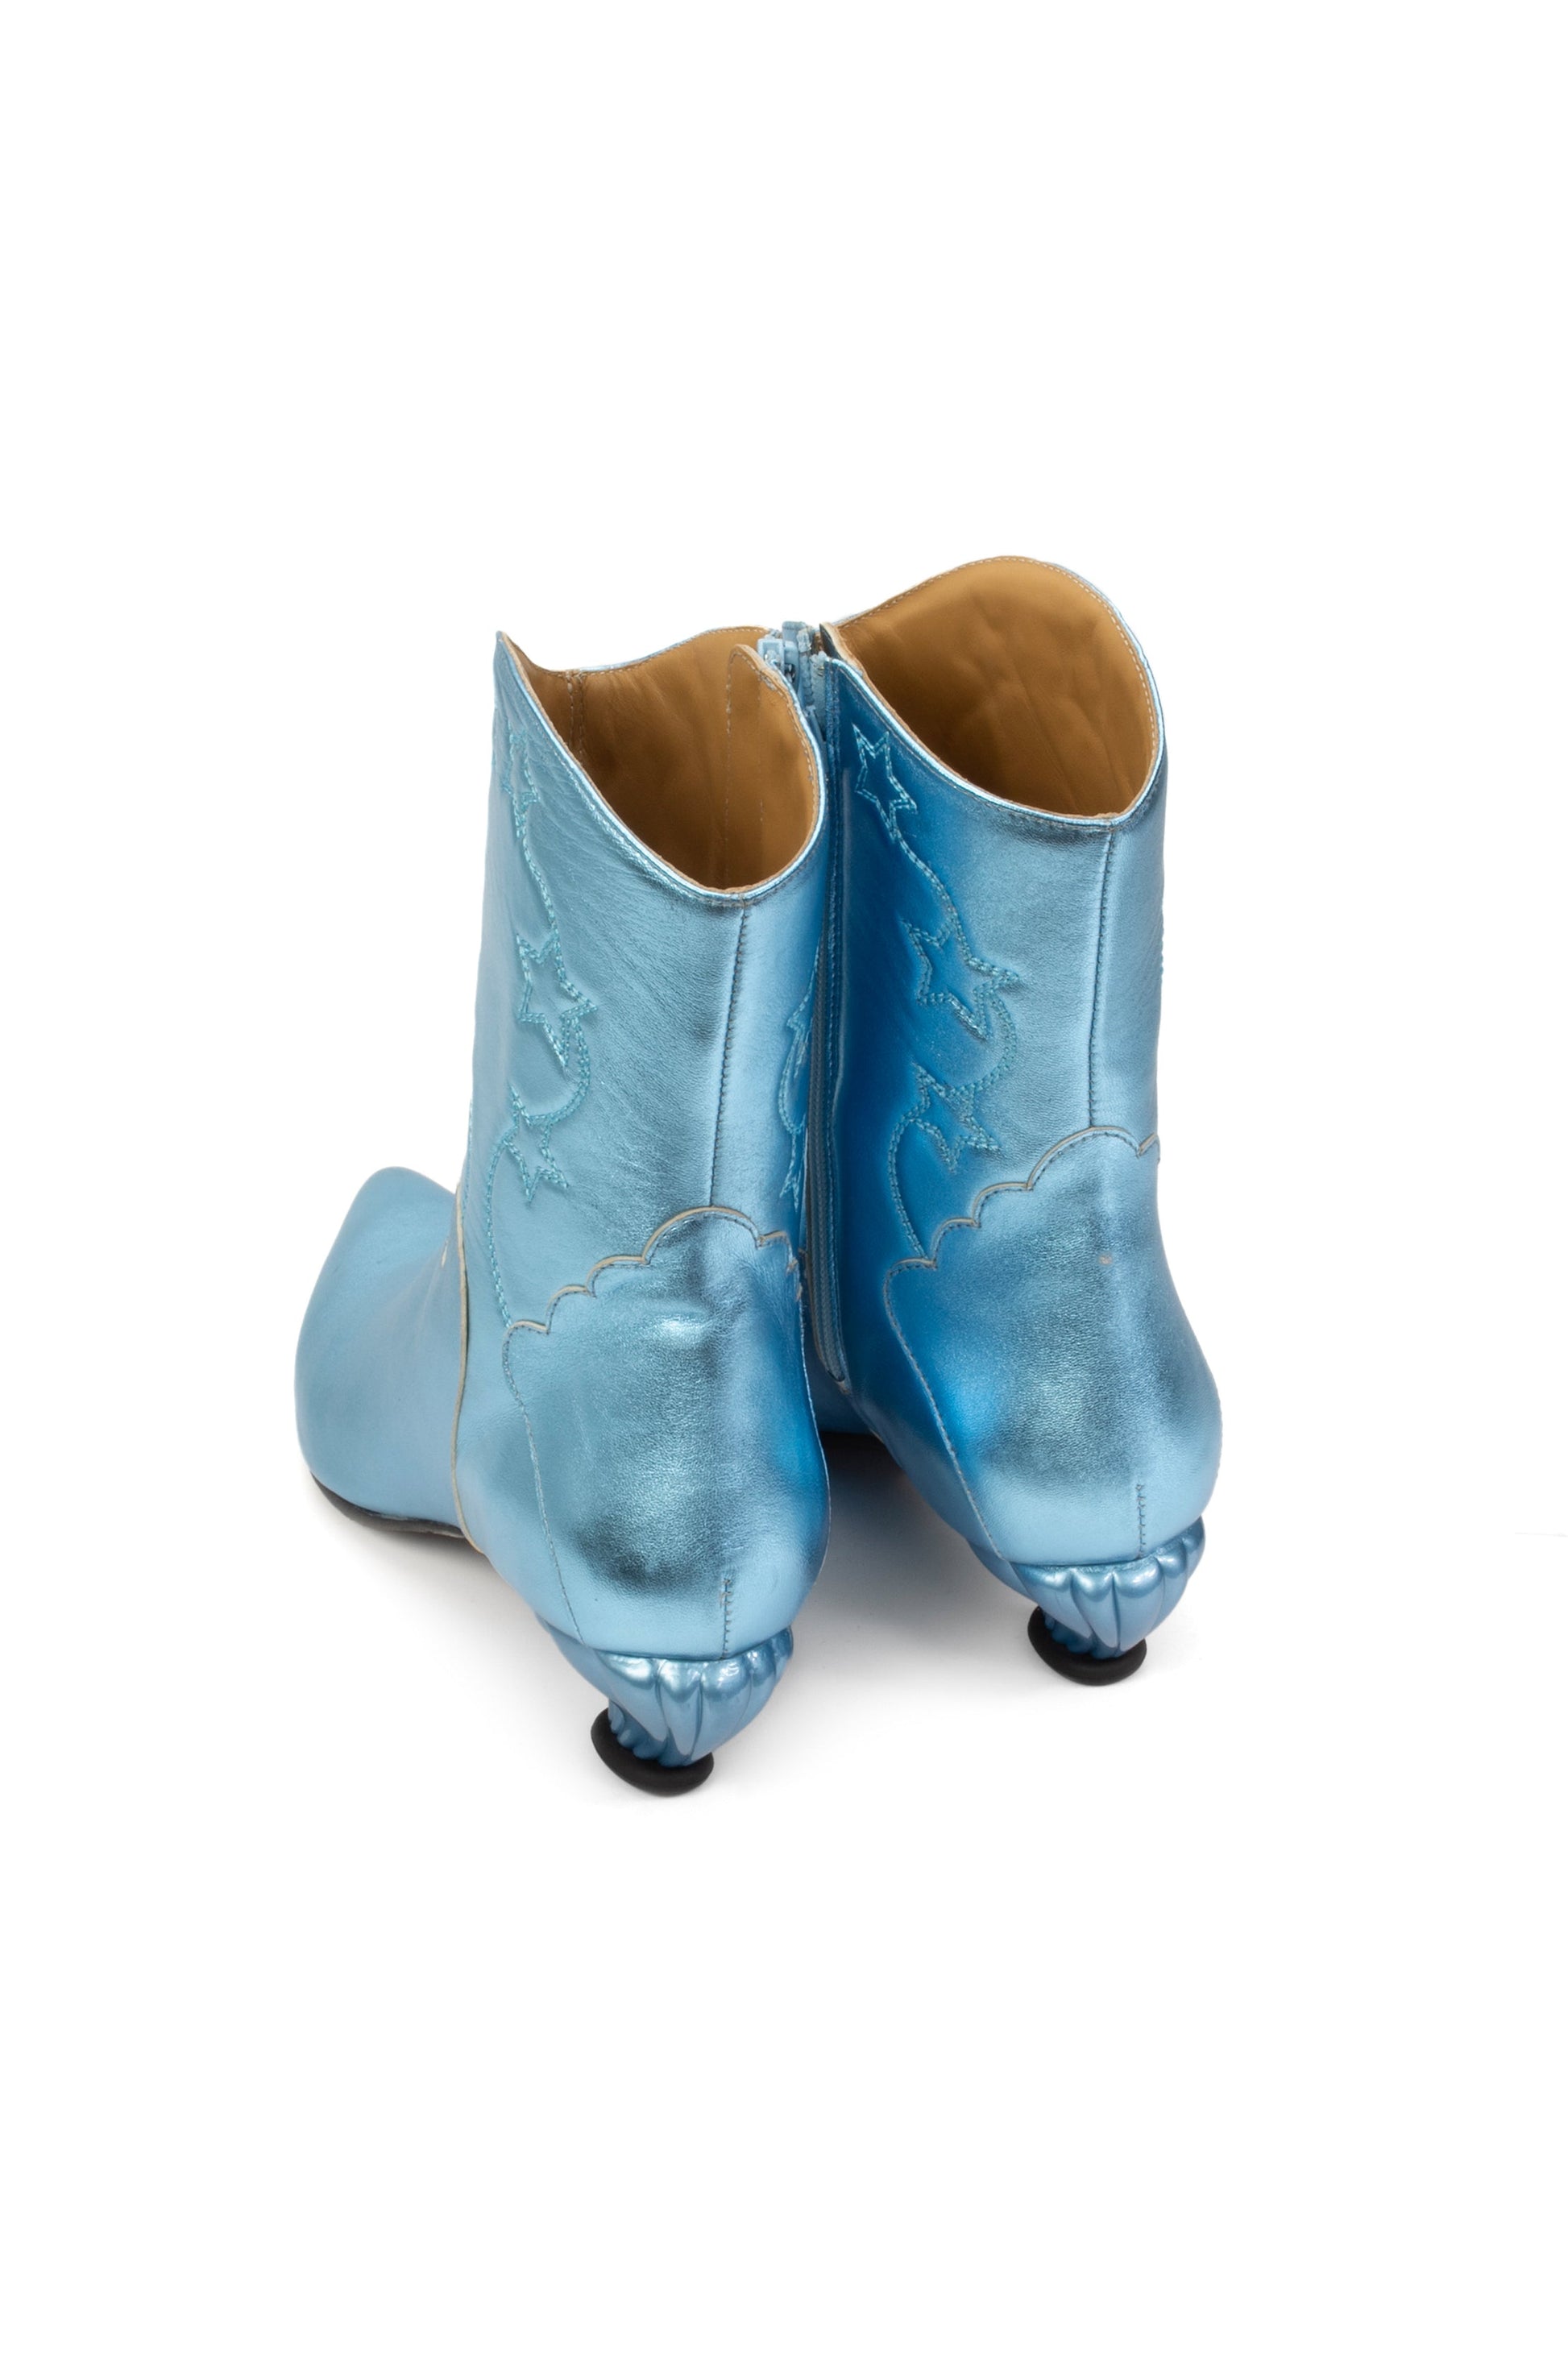 Carefully stitched and crafted boots with the same pattern on the ankles and front part